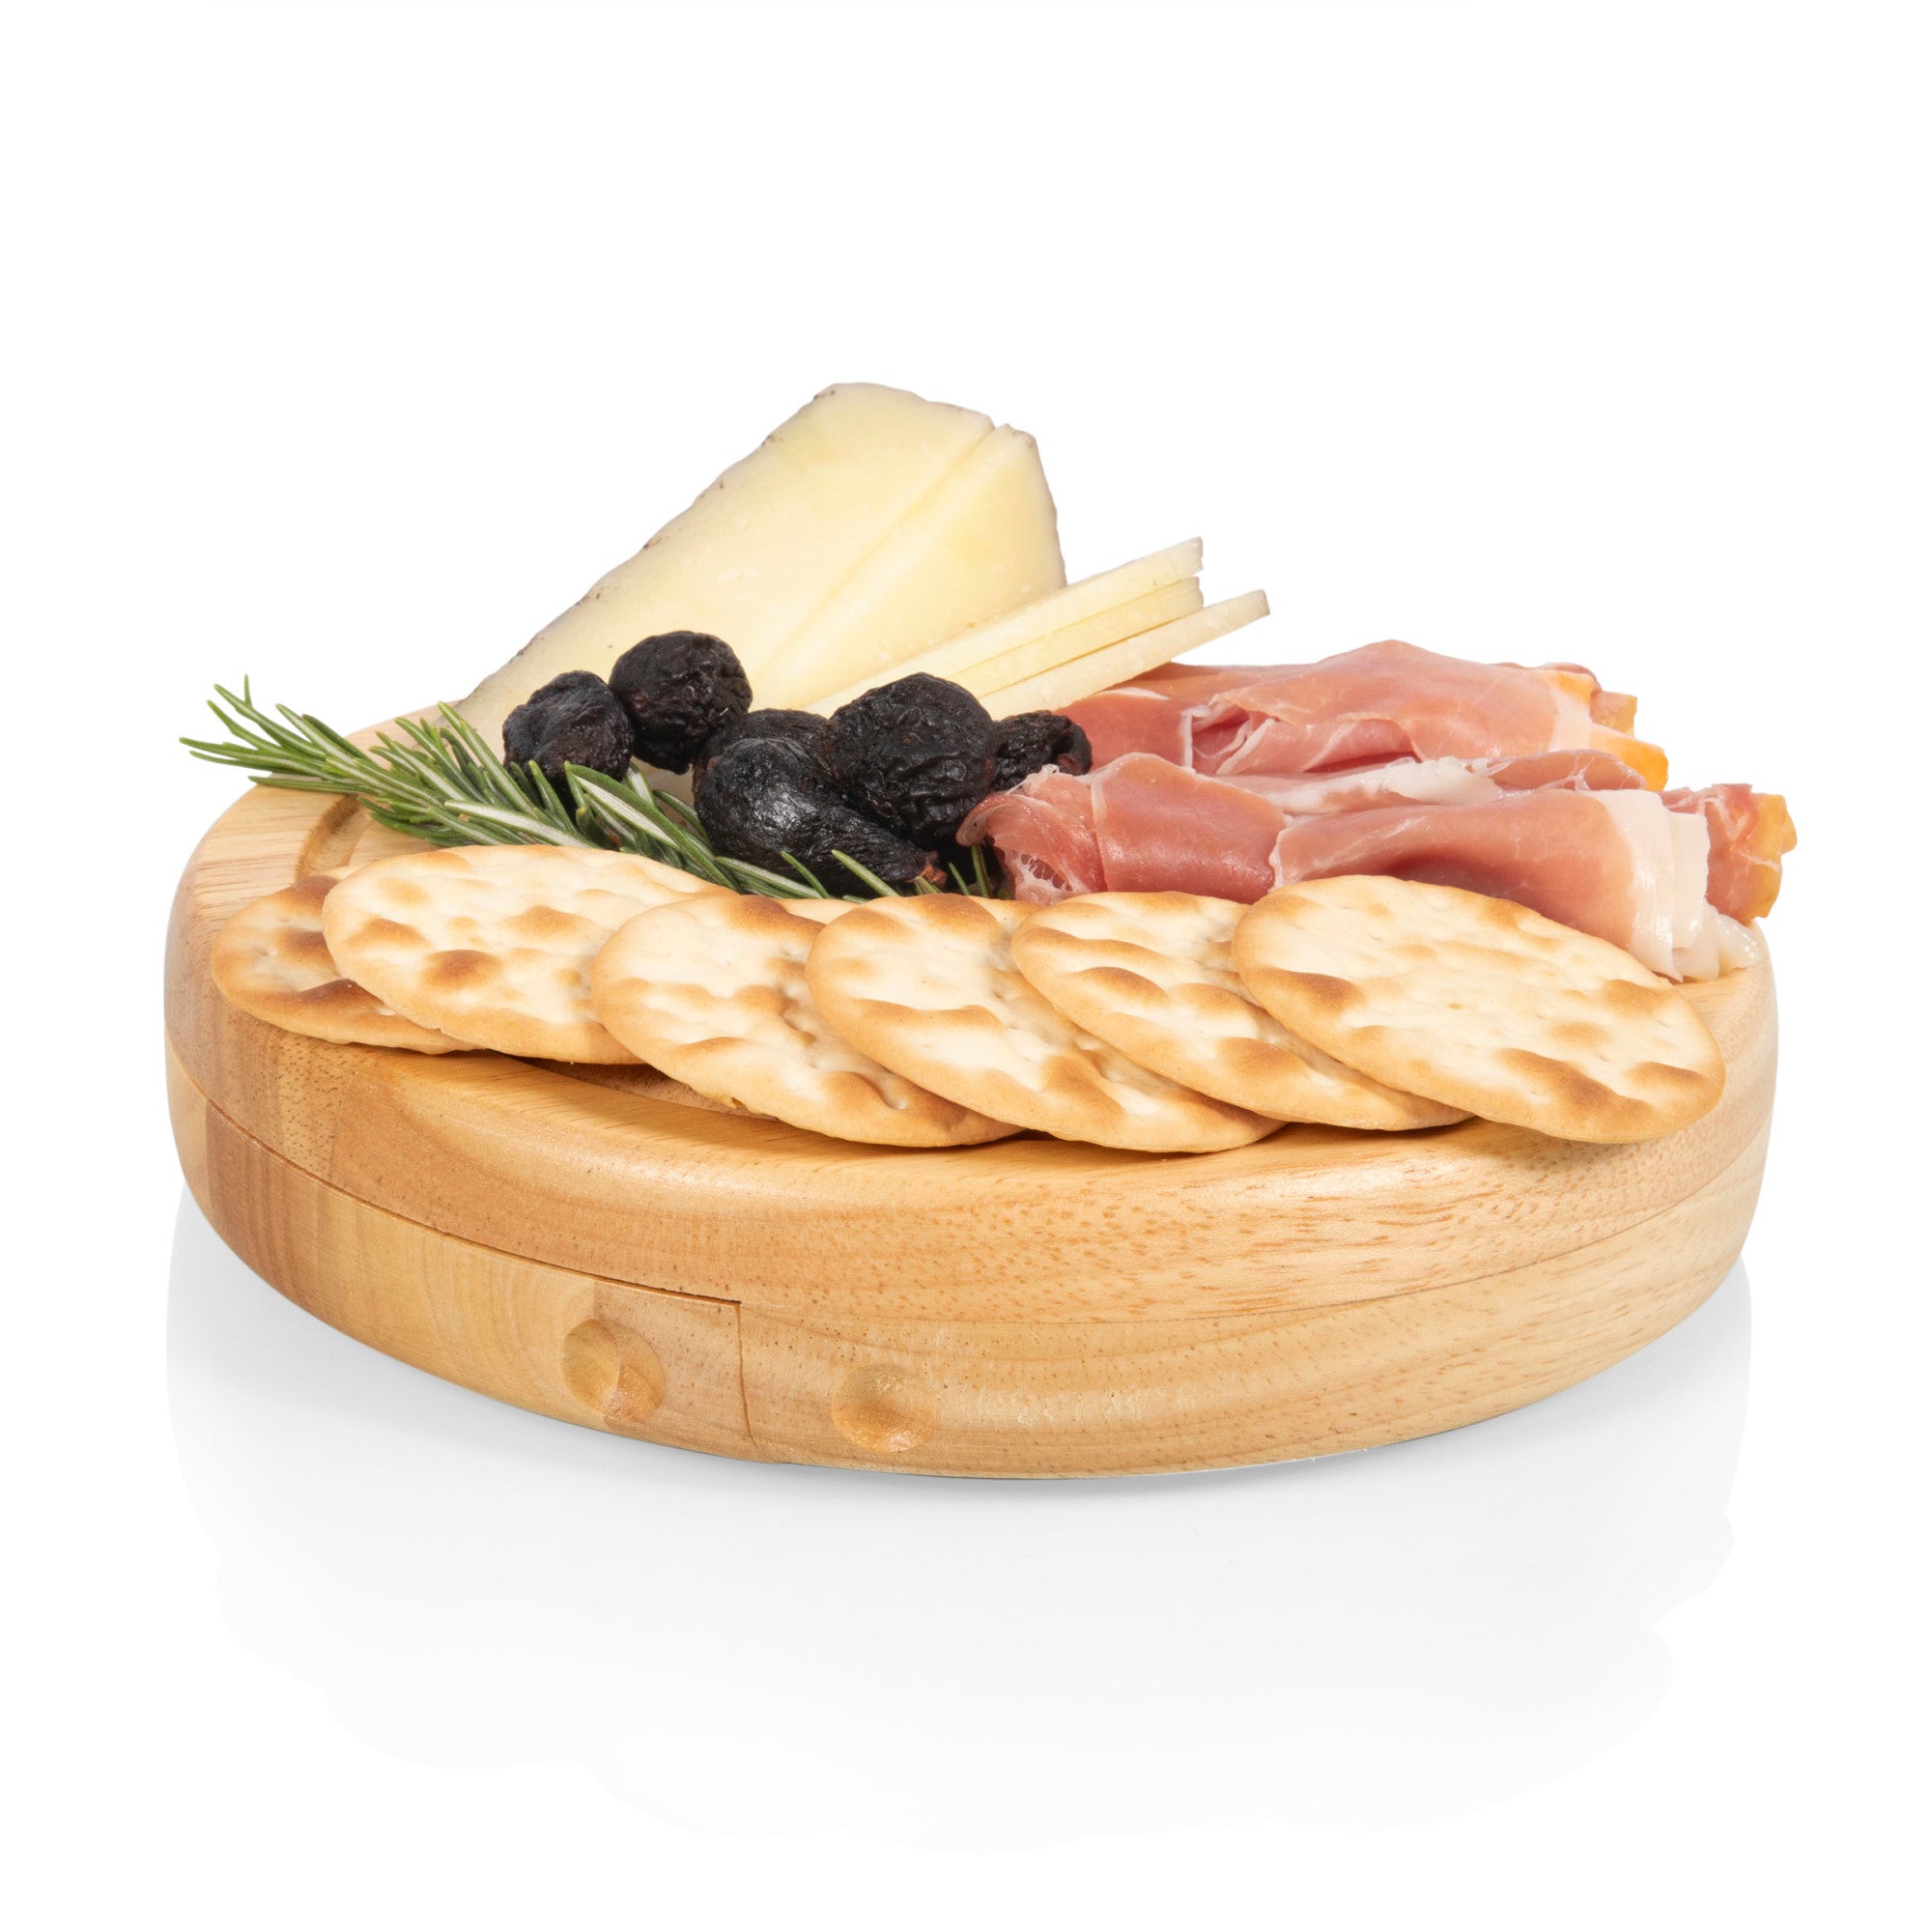 Seattle Seahawks - Brie Cheese Cutting Board & Tools Set